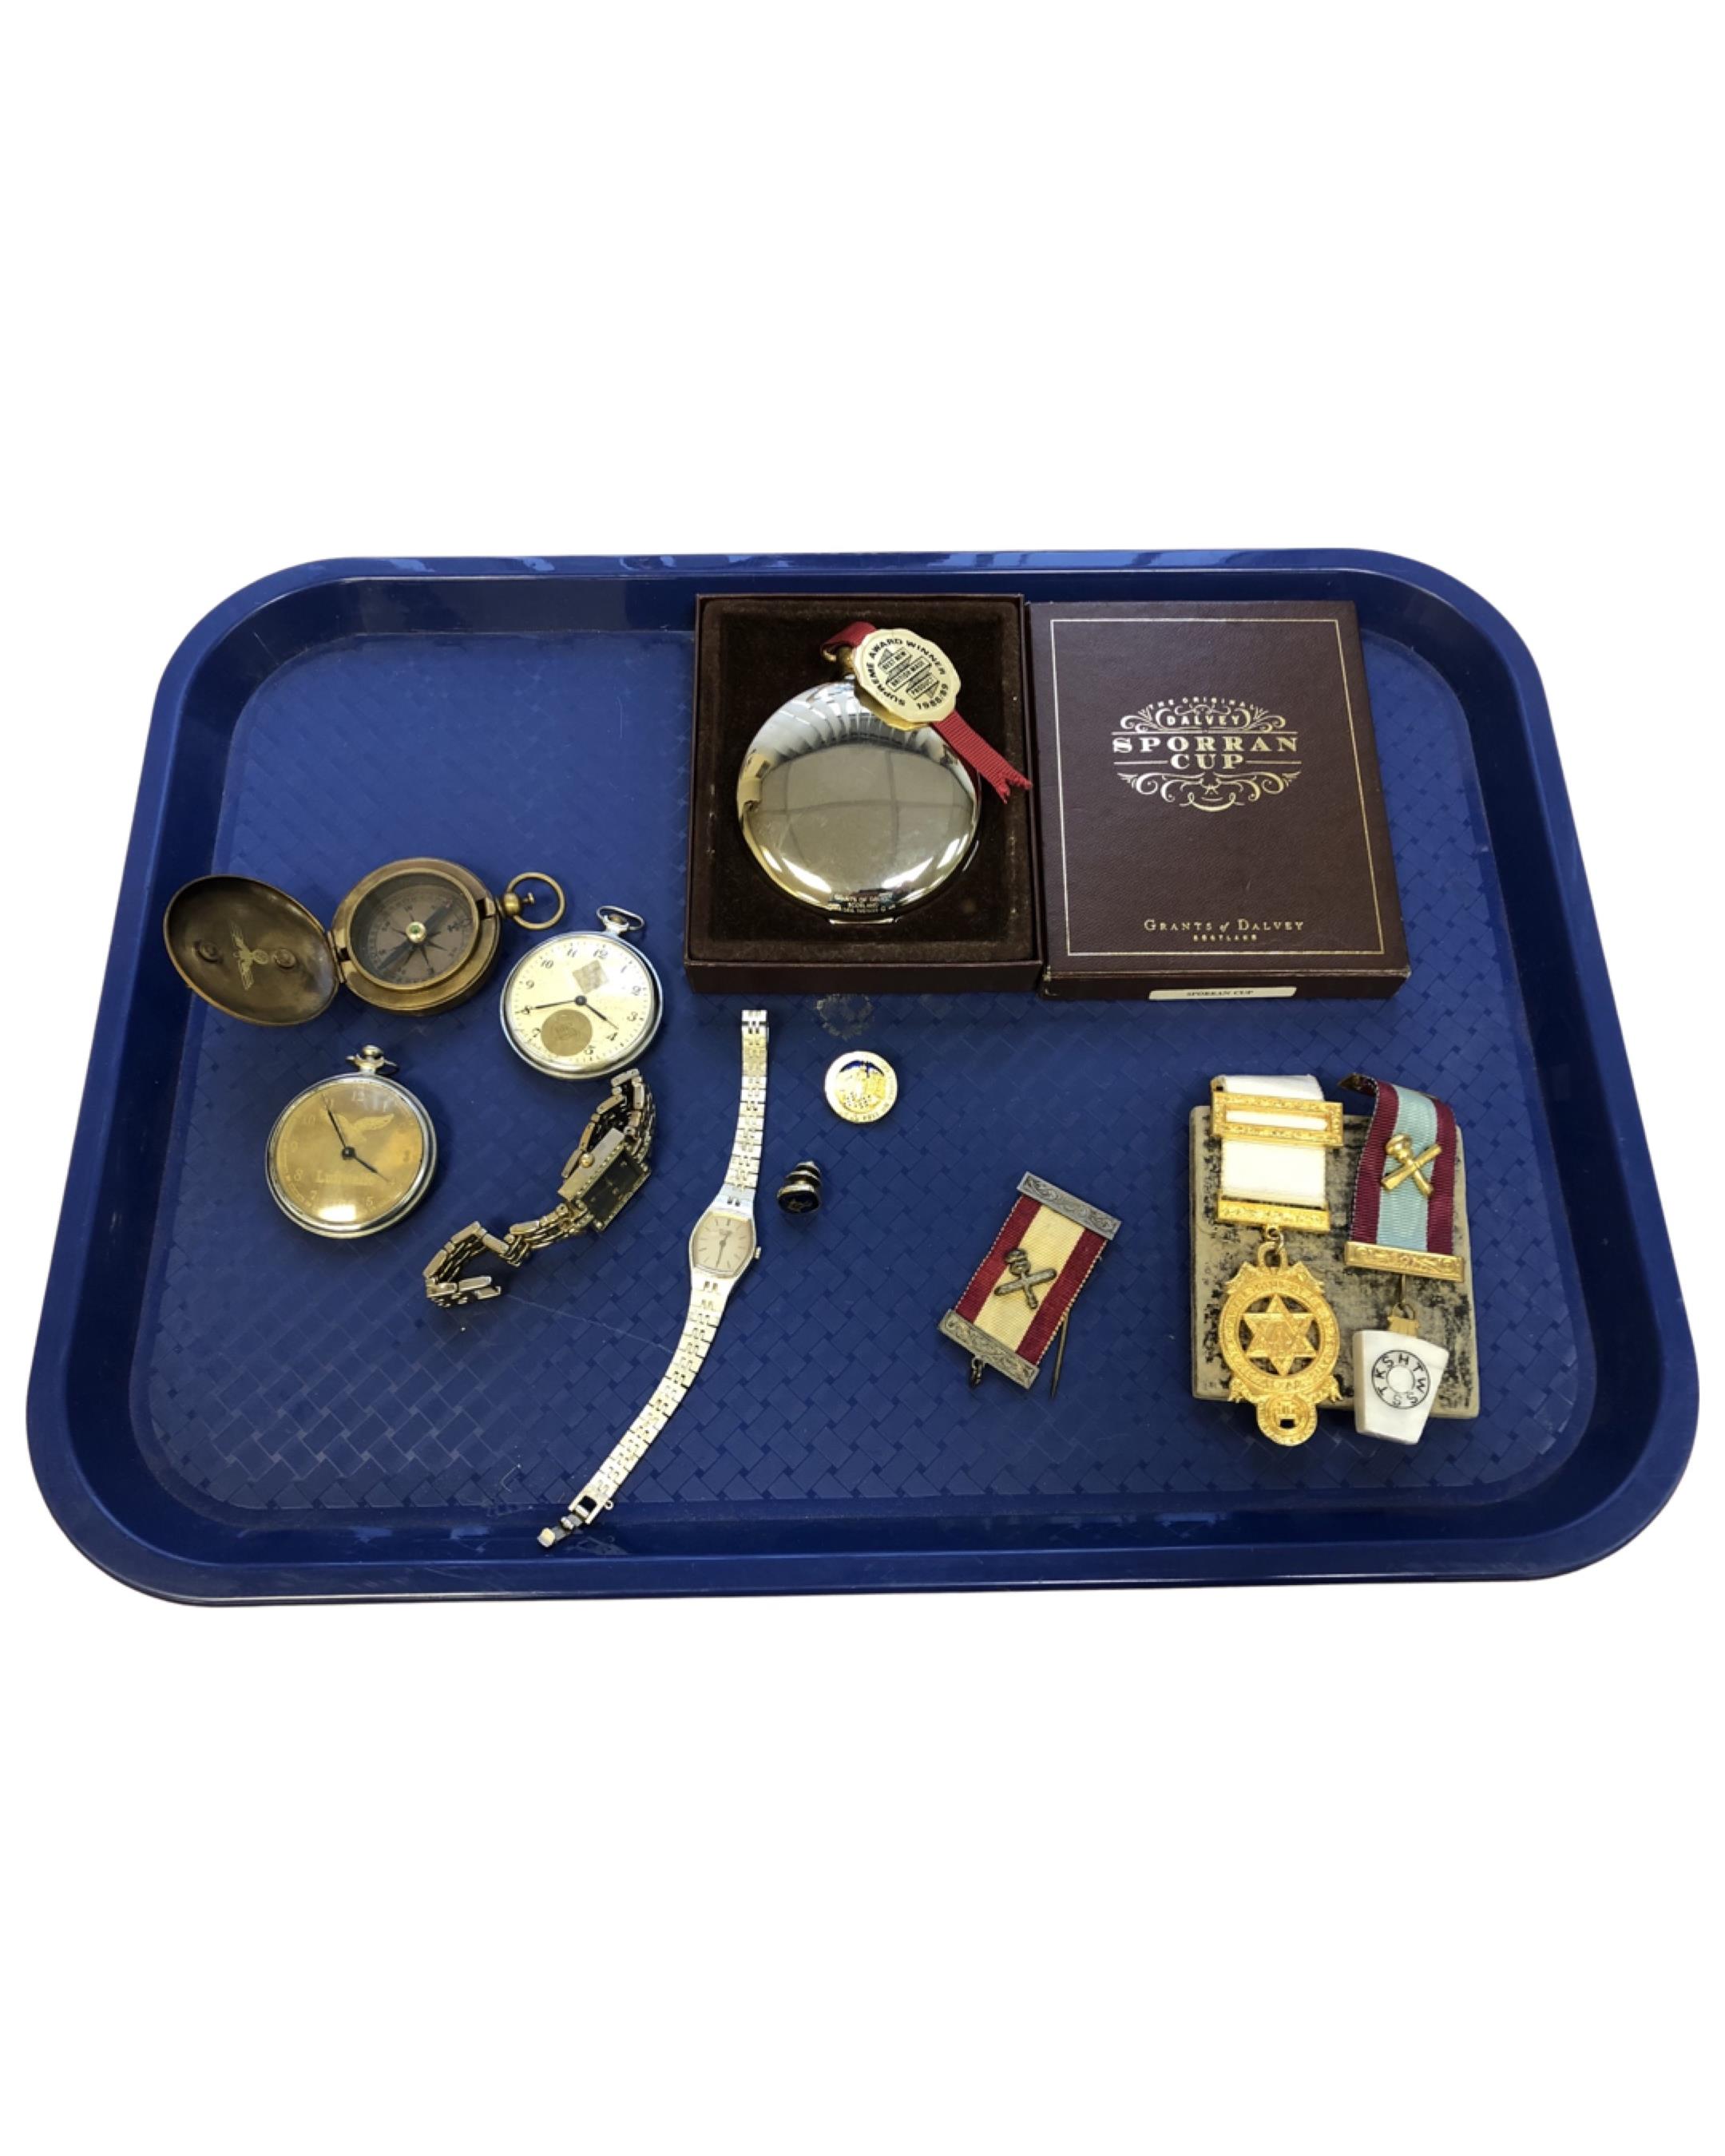 A tray containing reproduction German compass and pocket watches, sporran cup, medals,